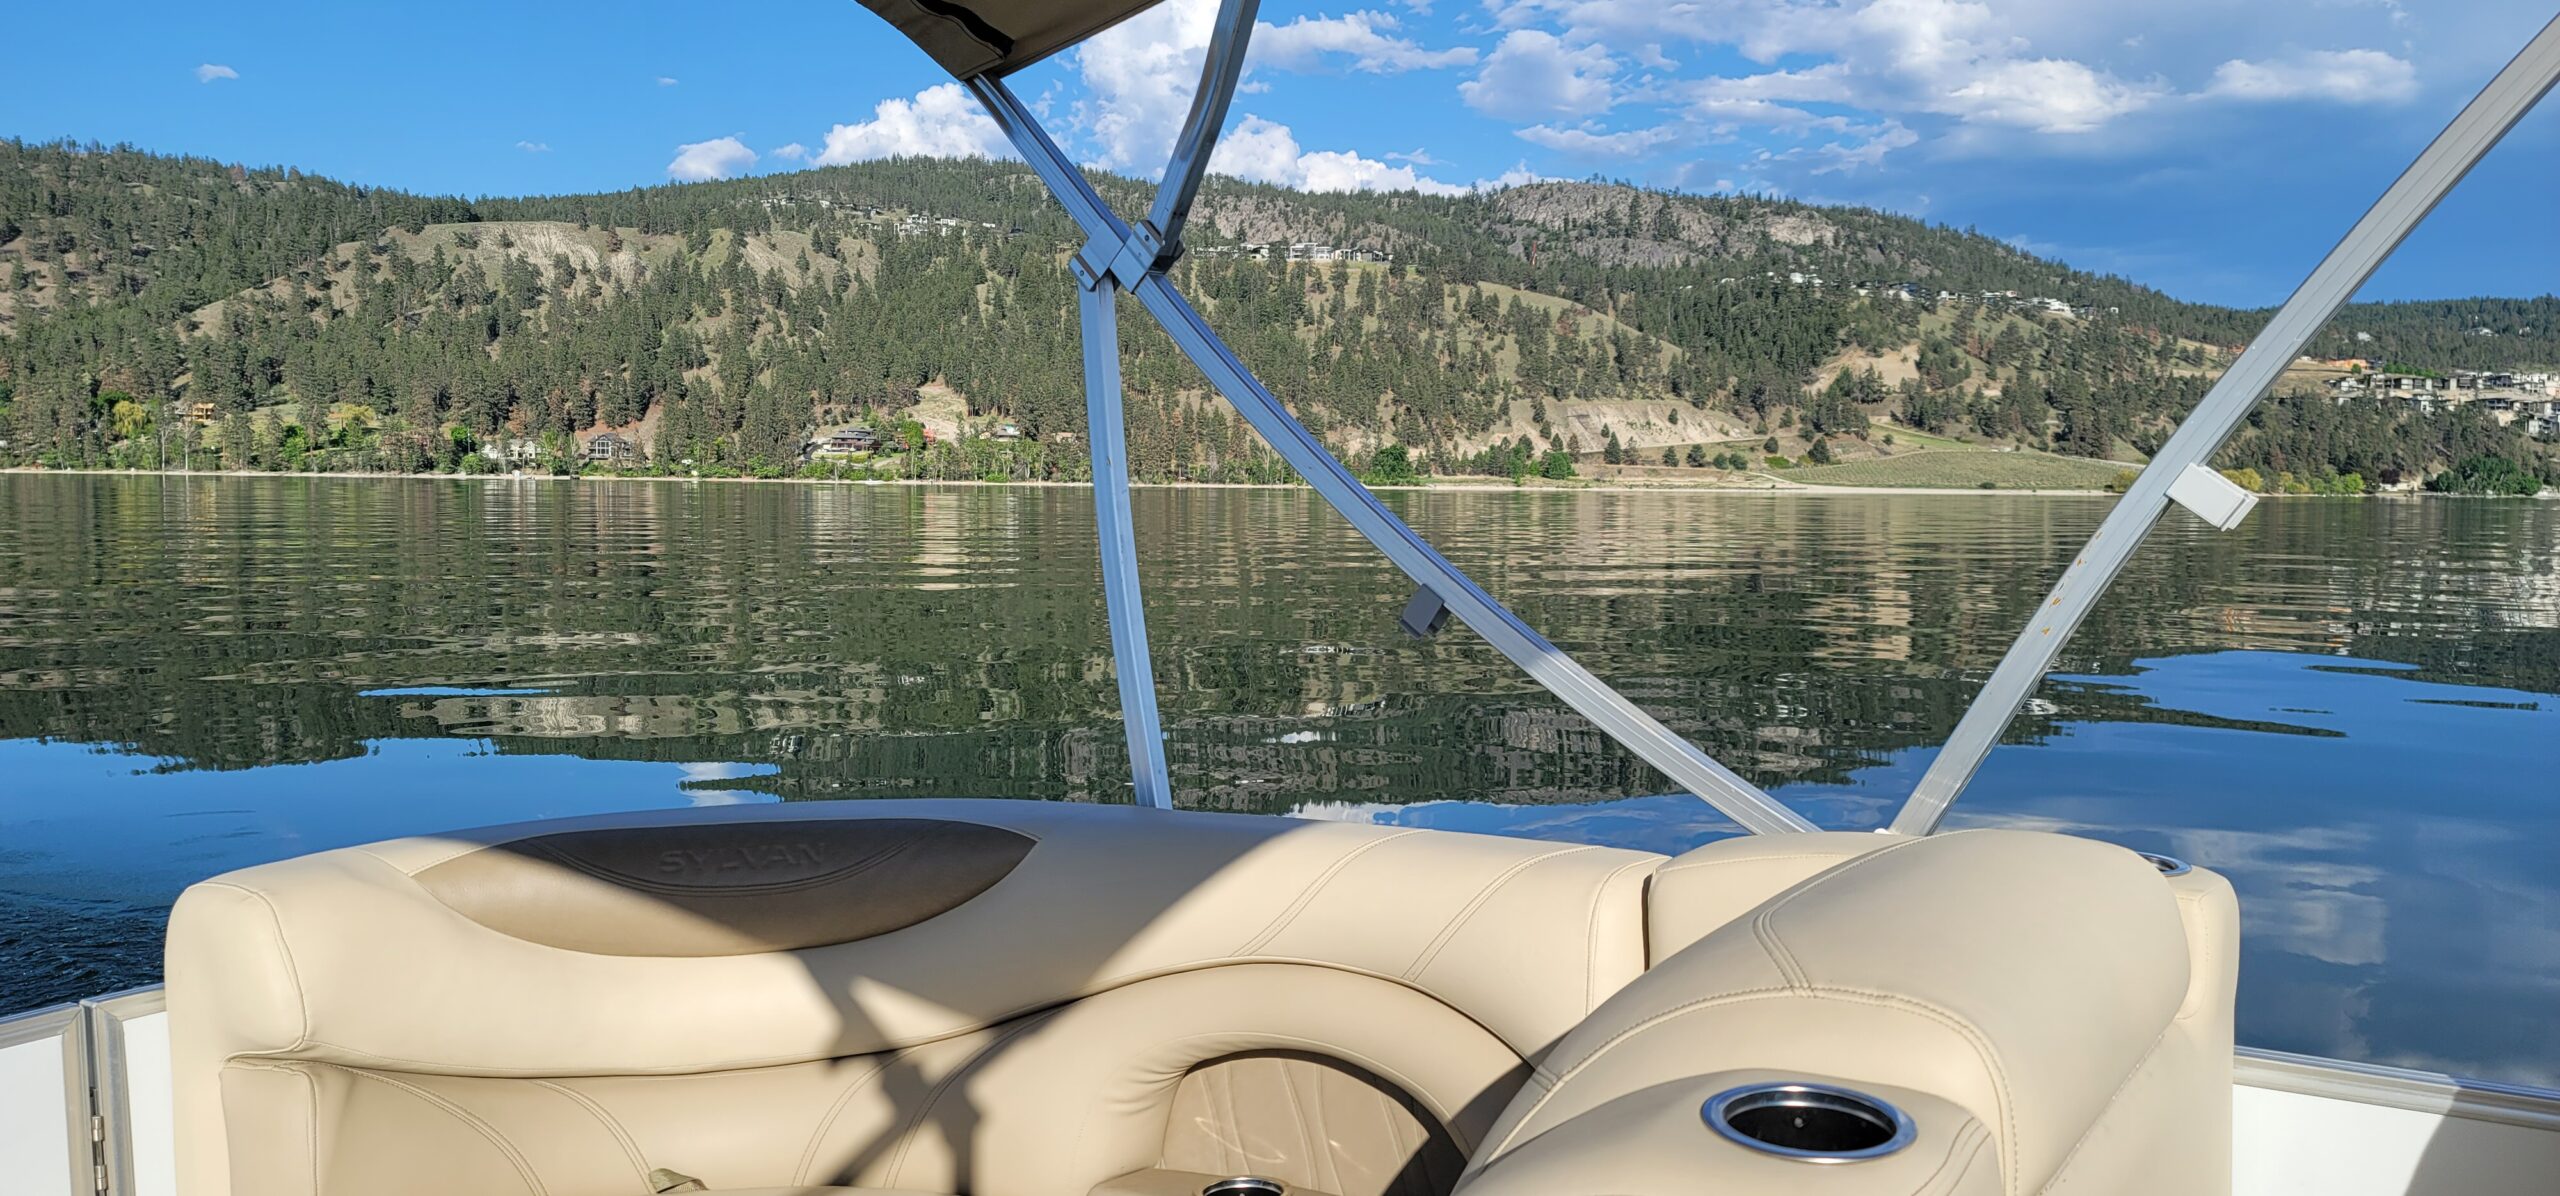 Looking at the mountains from Okanagan Lake, boat tours